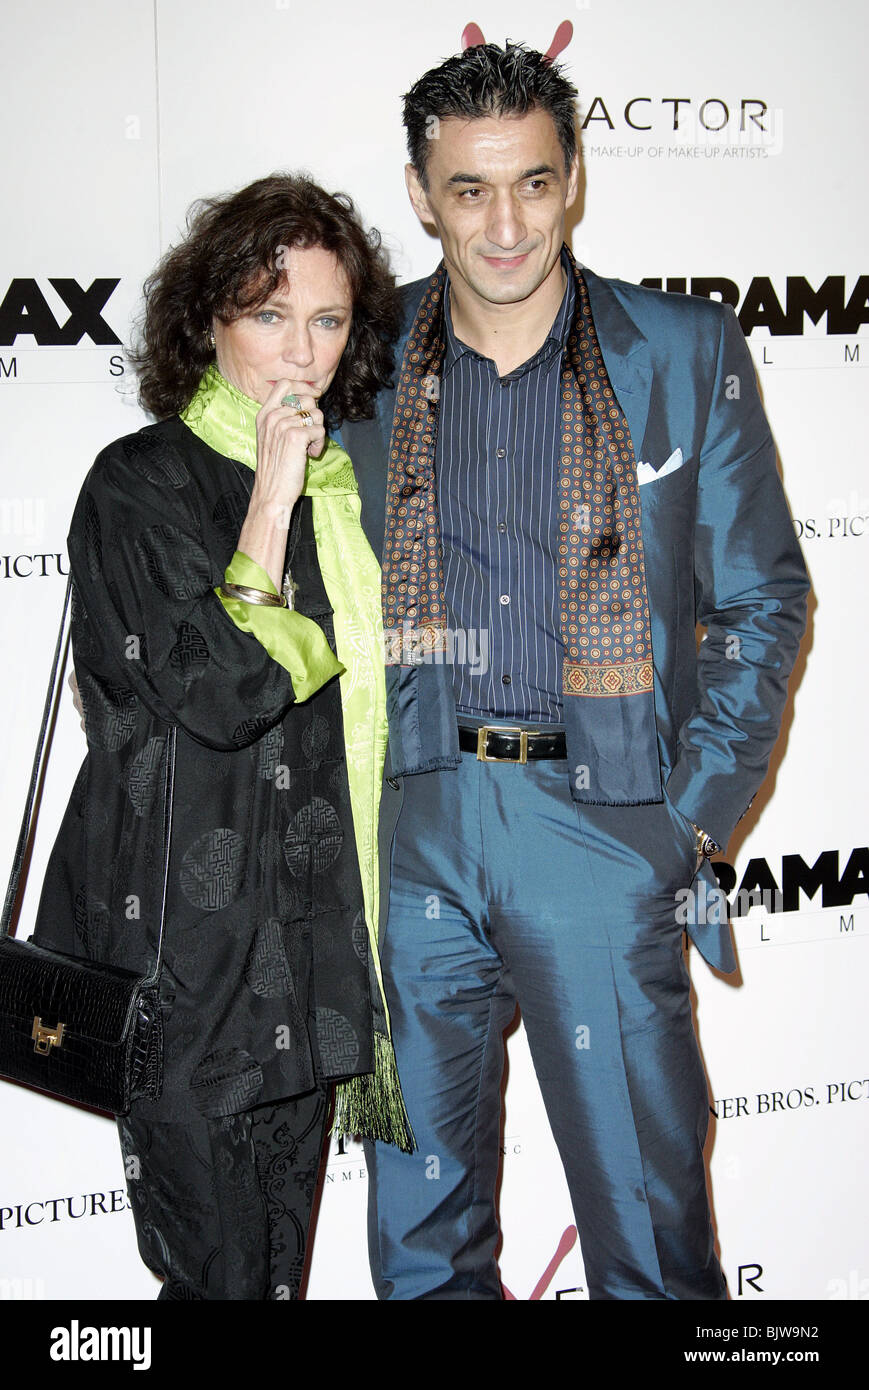 JACQUELINE BISSET & EMIN BOZTEPE THE AVIATOR FILM PREMIERE CHINESE THEATRE HOLLYWOOD LOS ANGELES USA 01 December 2004 Stock Photo